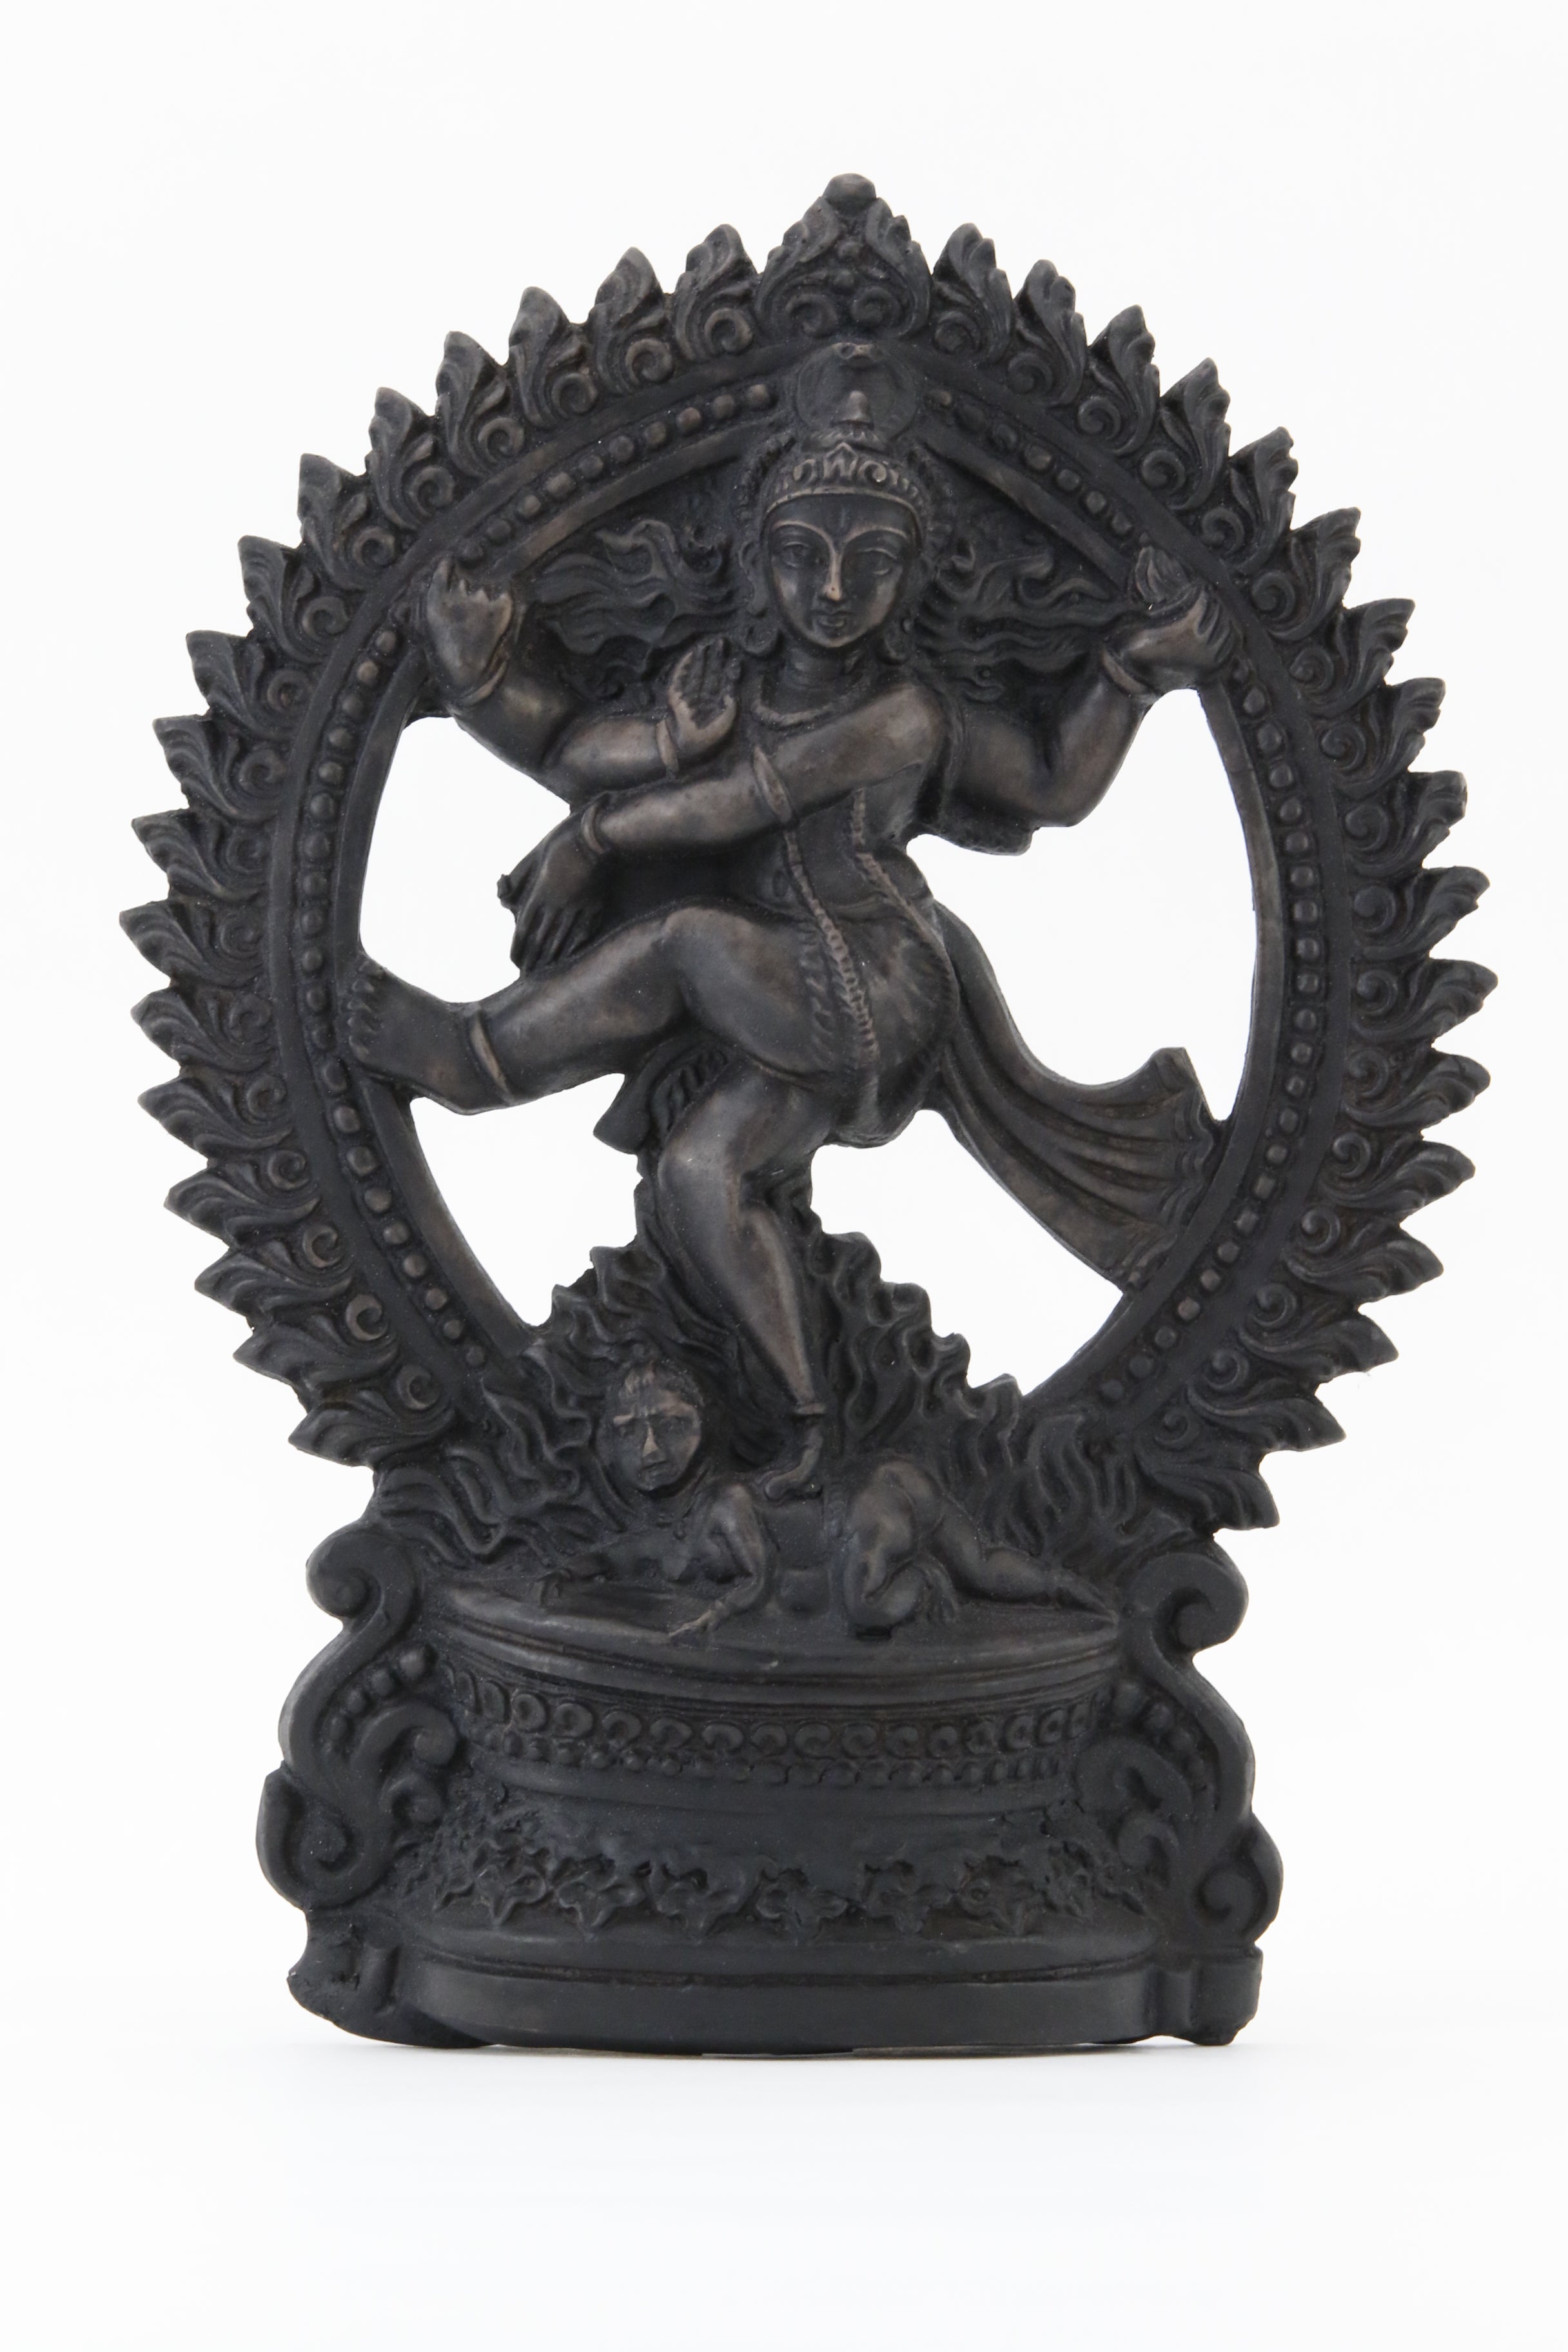 Amazon.com: Top Collection Dancing Nataraja Shiva Statue- Divine Hindu  Figurine that Destroys Evil, Ignorance, and Death in Premium Cold Cast  Bronze- 10.5-Inch Collectible East Asian Meditating Sculpture : Home &  Kitchen